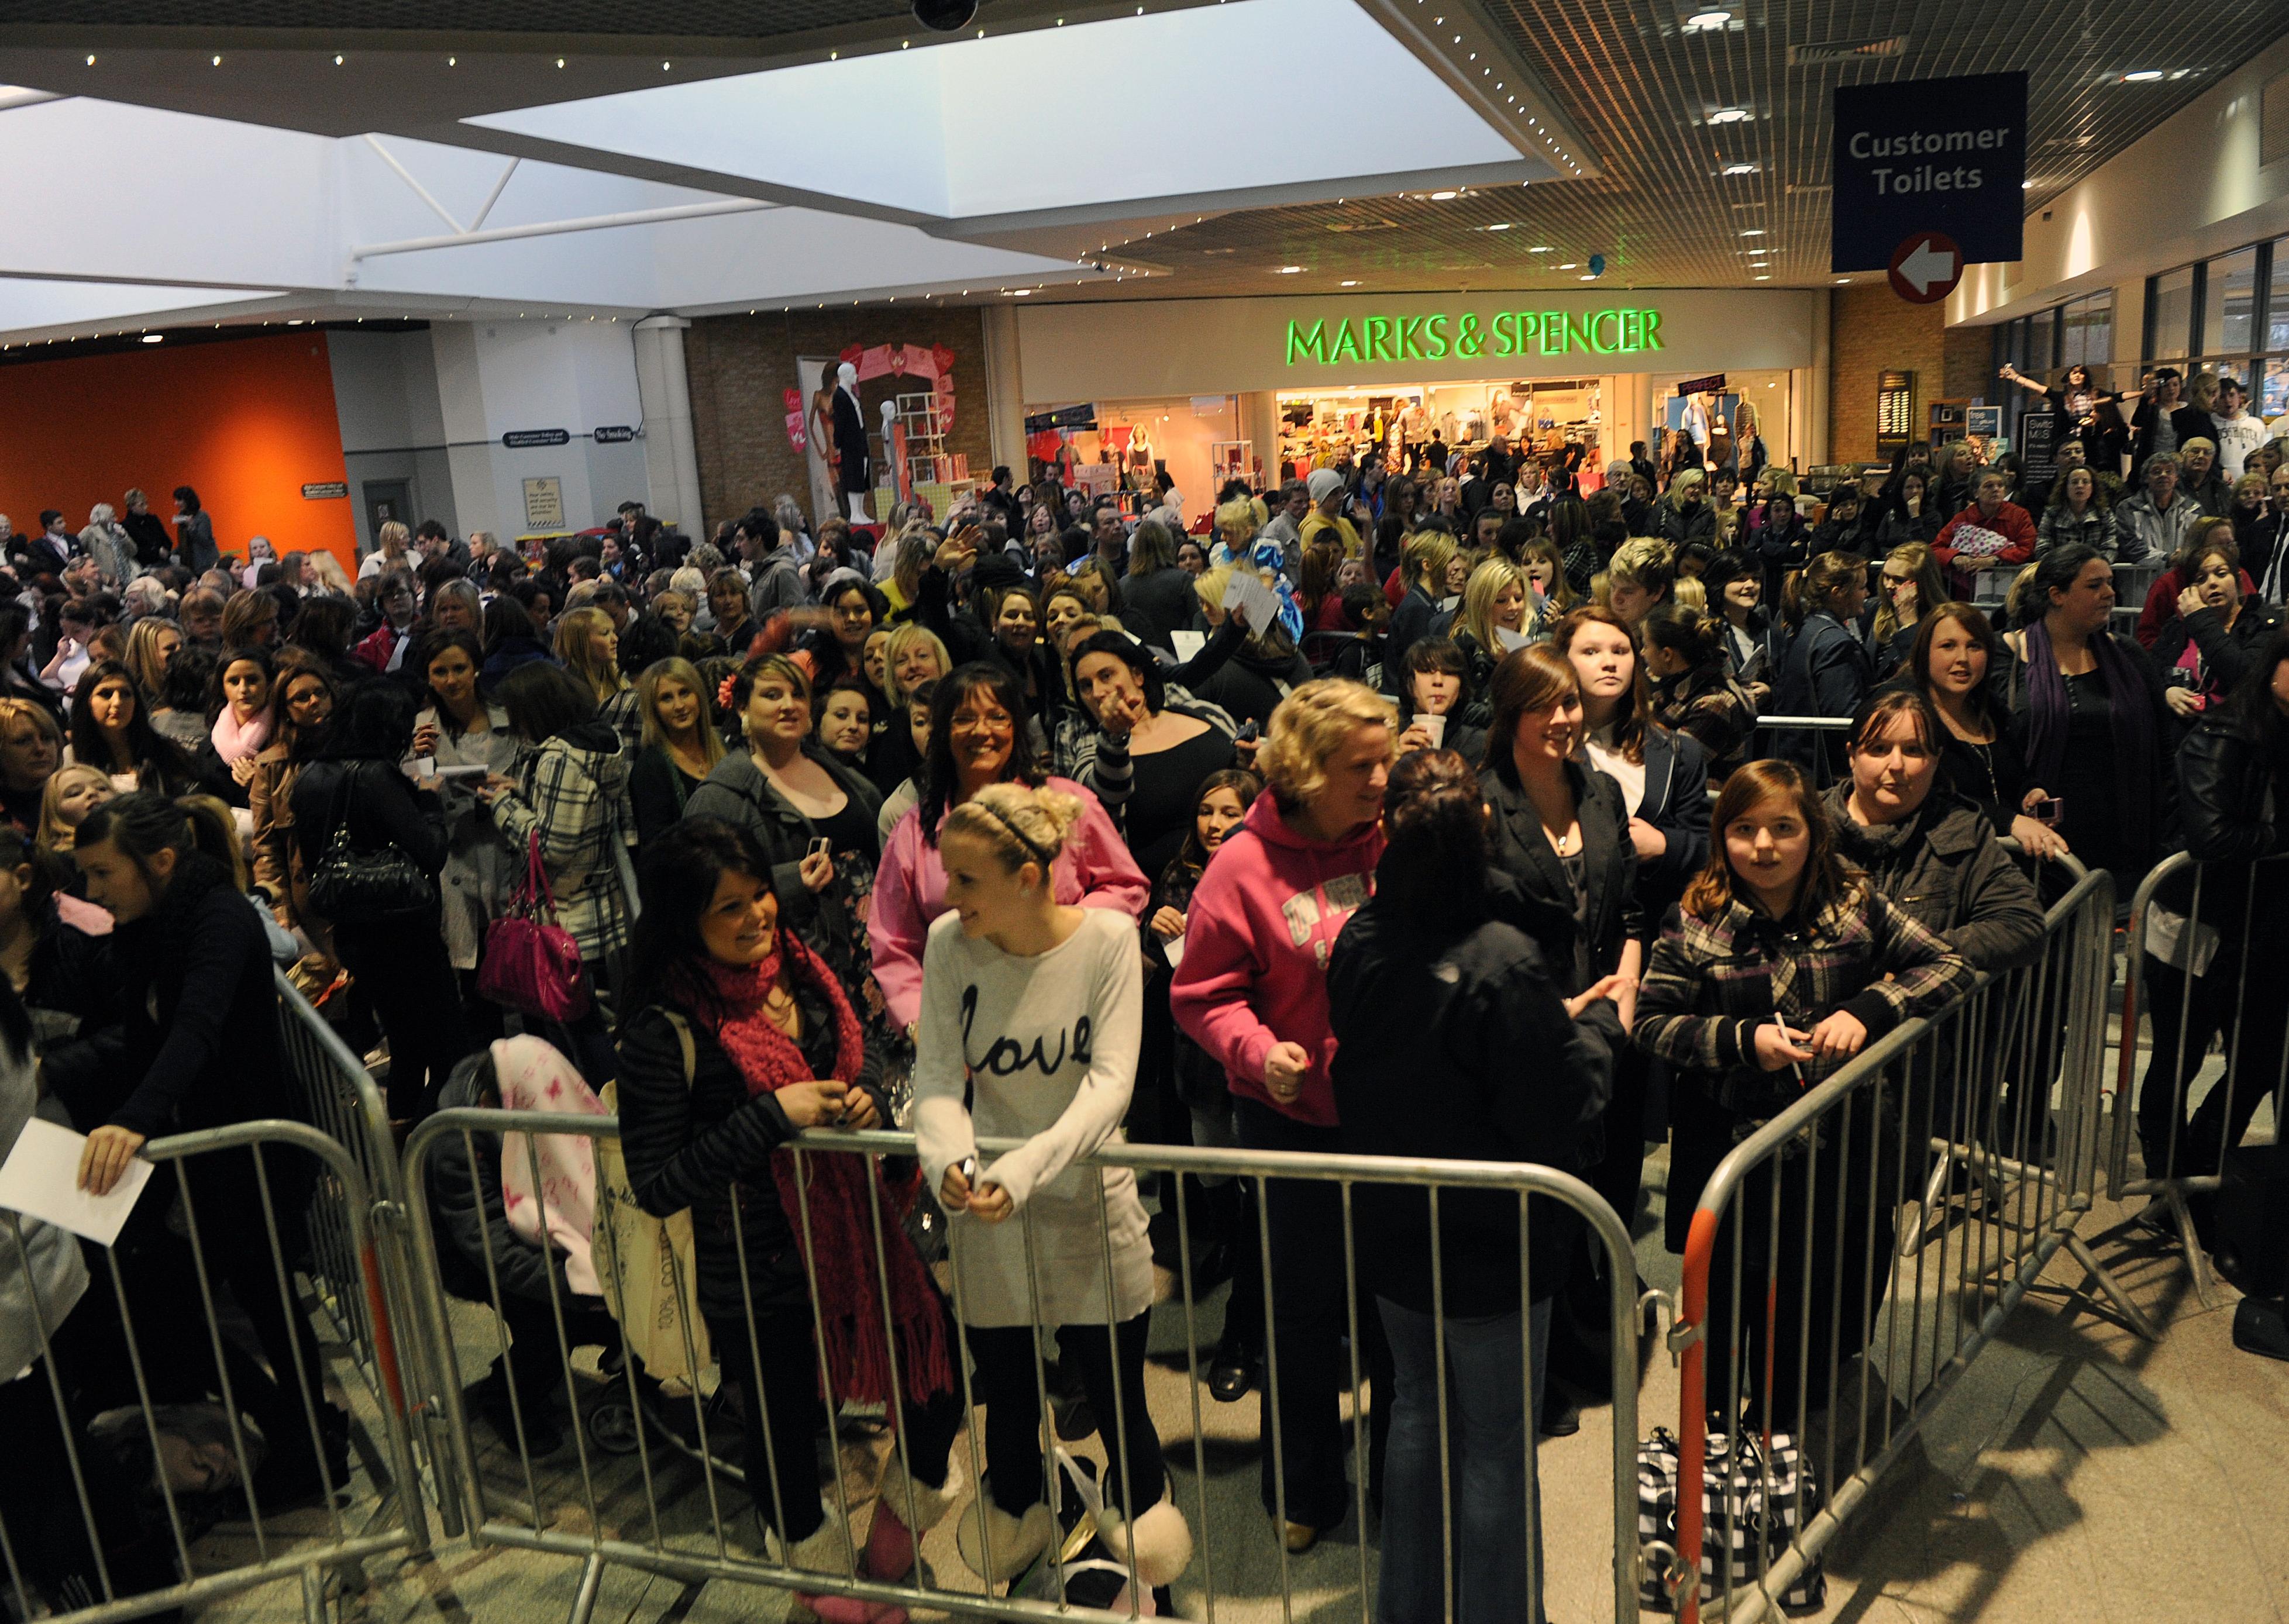 Crowds at the Holmbush Shopping centre. Picture by Stephen Goodger